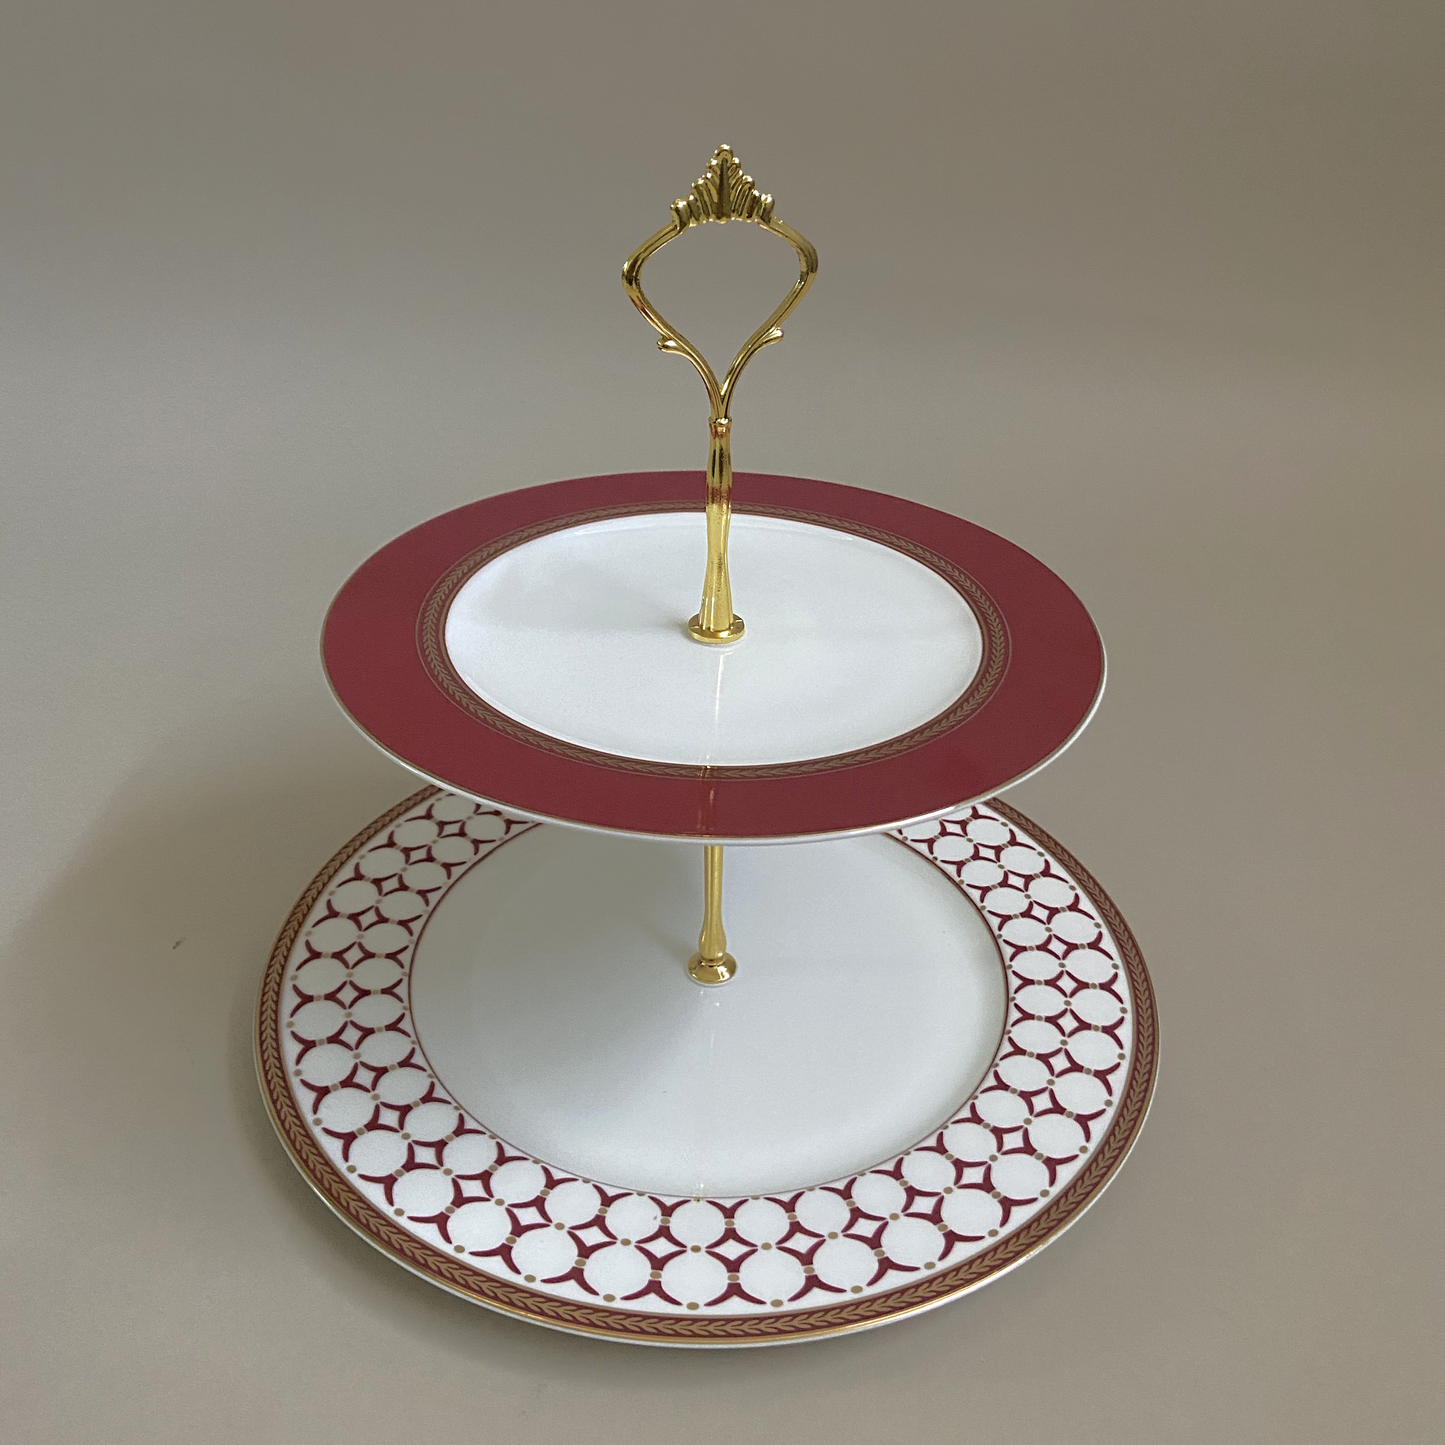 Gezellig Red Cake Stand (2 Tier)